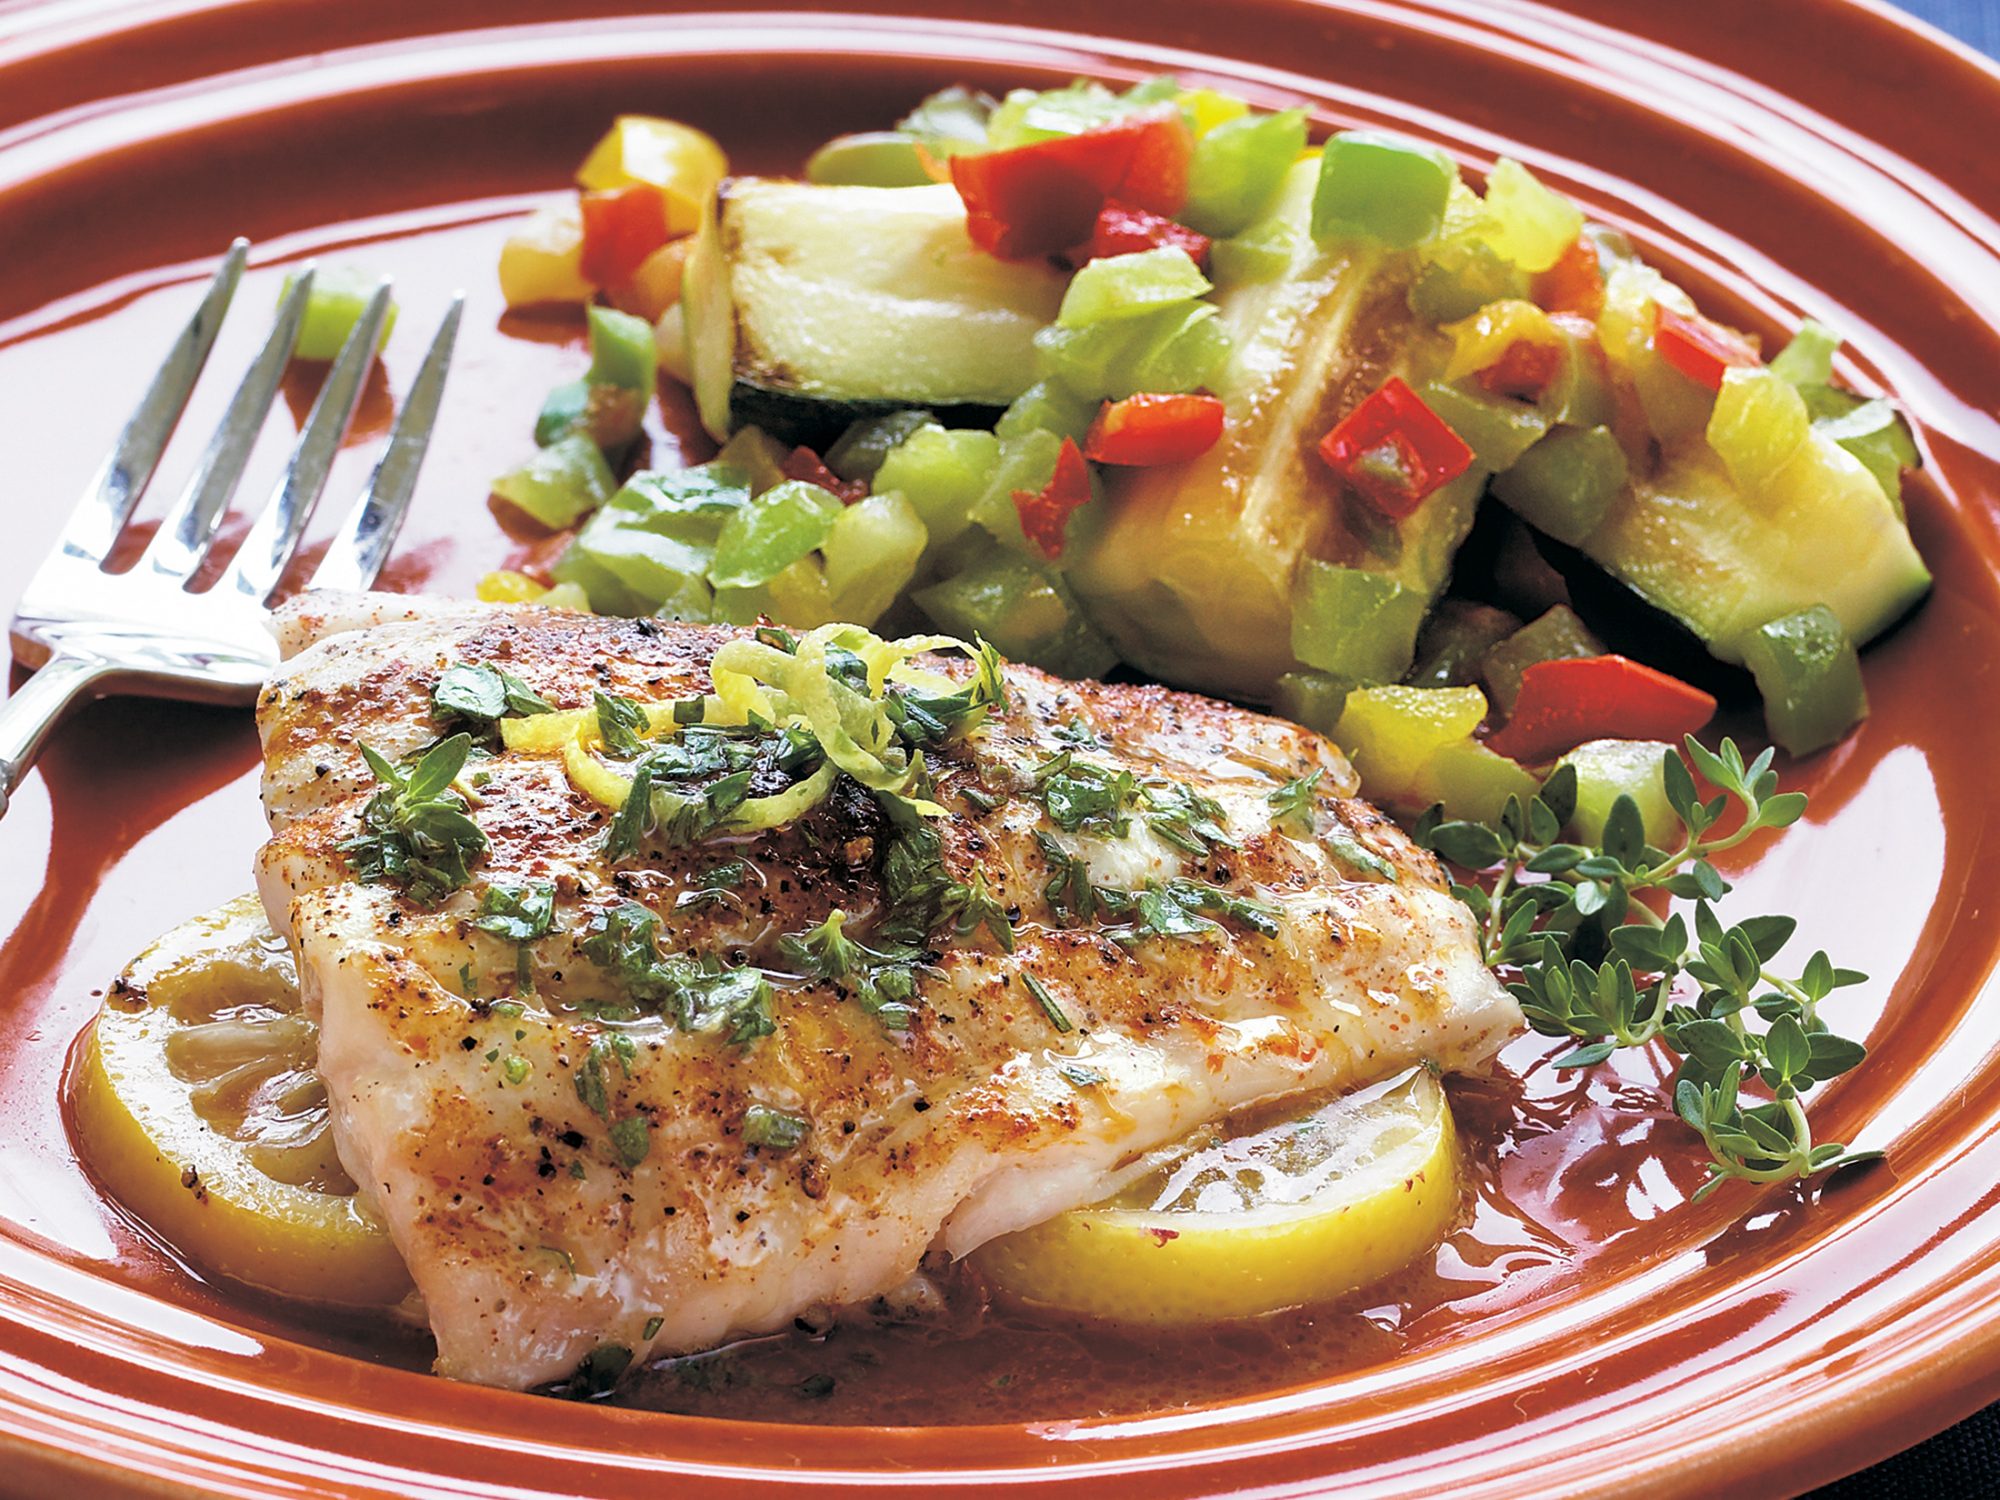 #8: Lemon Red Snapper with Herbed Butter